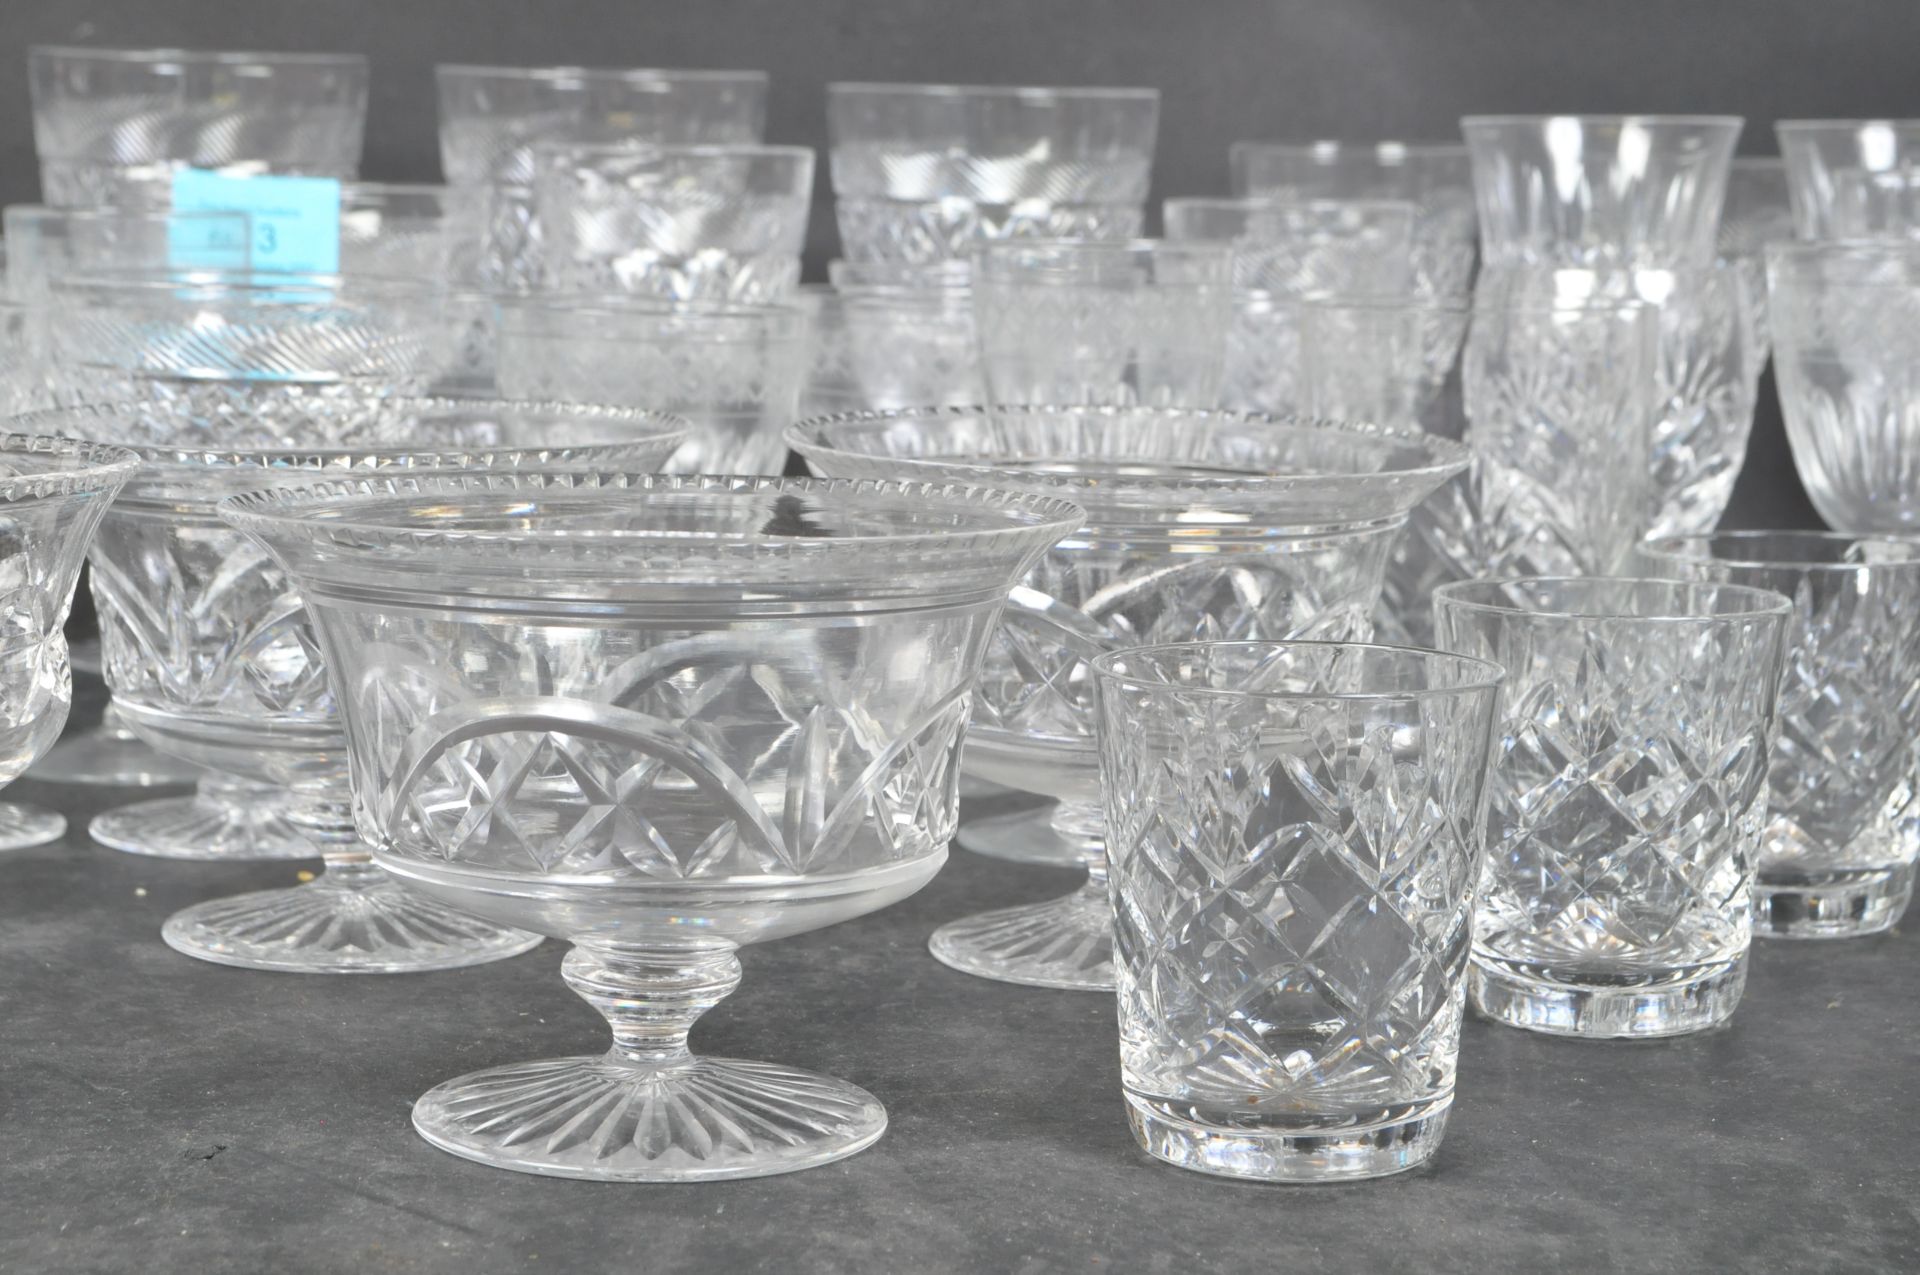 COLLECTION OF VINTAGE ENGLISH LEAD CUT GLASS DRINKING GLASSES - Image 2 of 4